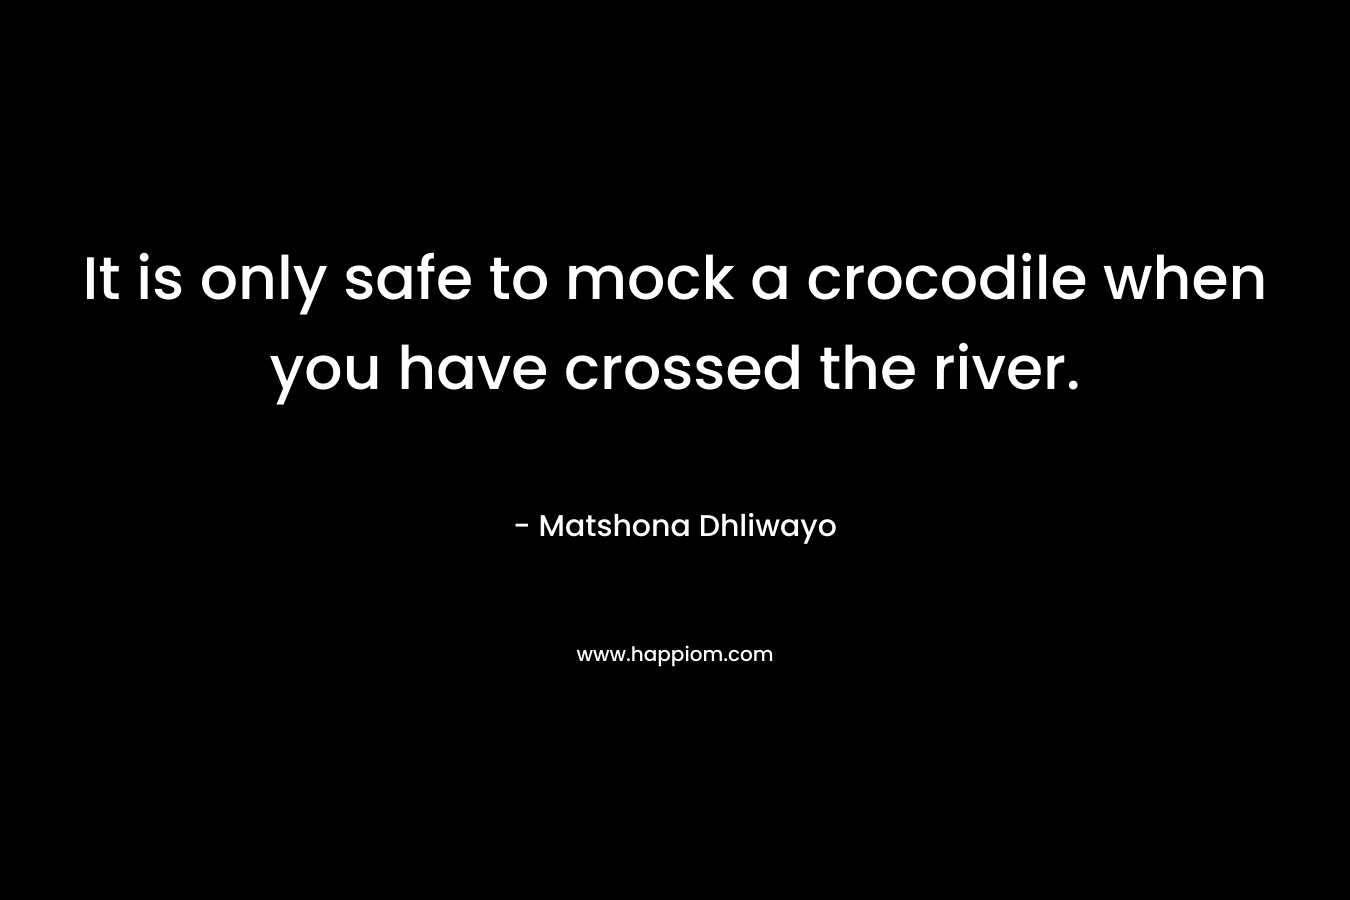 It is only safe to mock a crocodile when you have crossed the river. – Matshona Dhliwayo